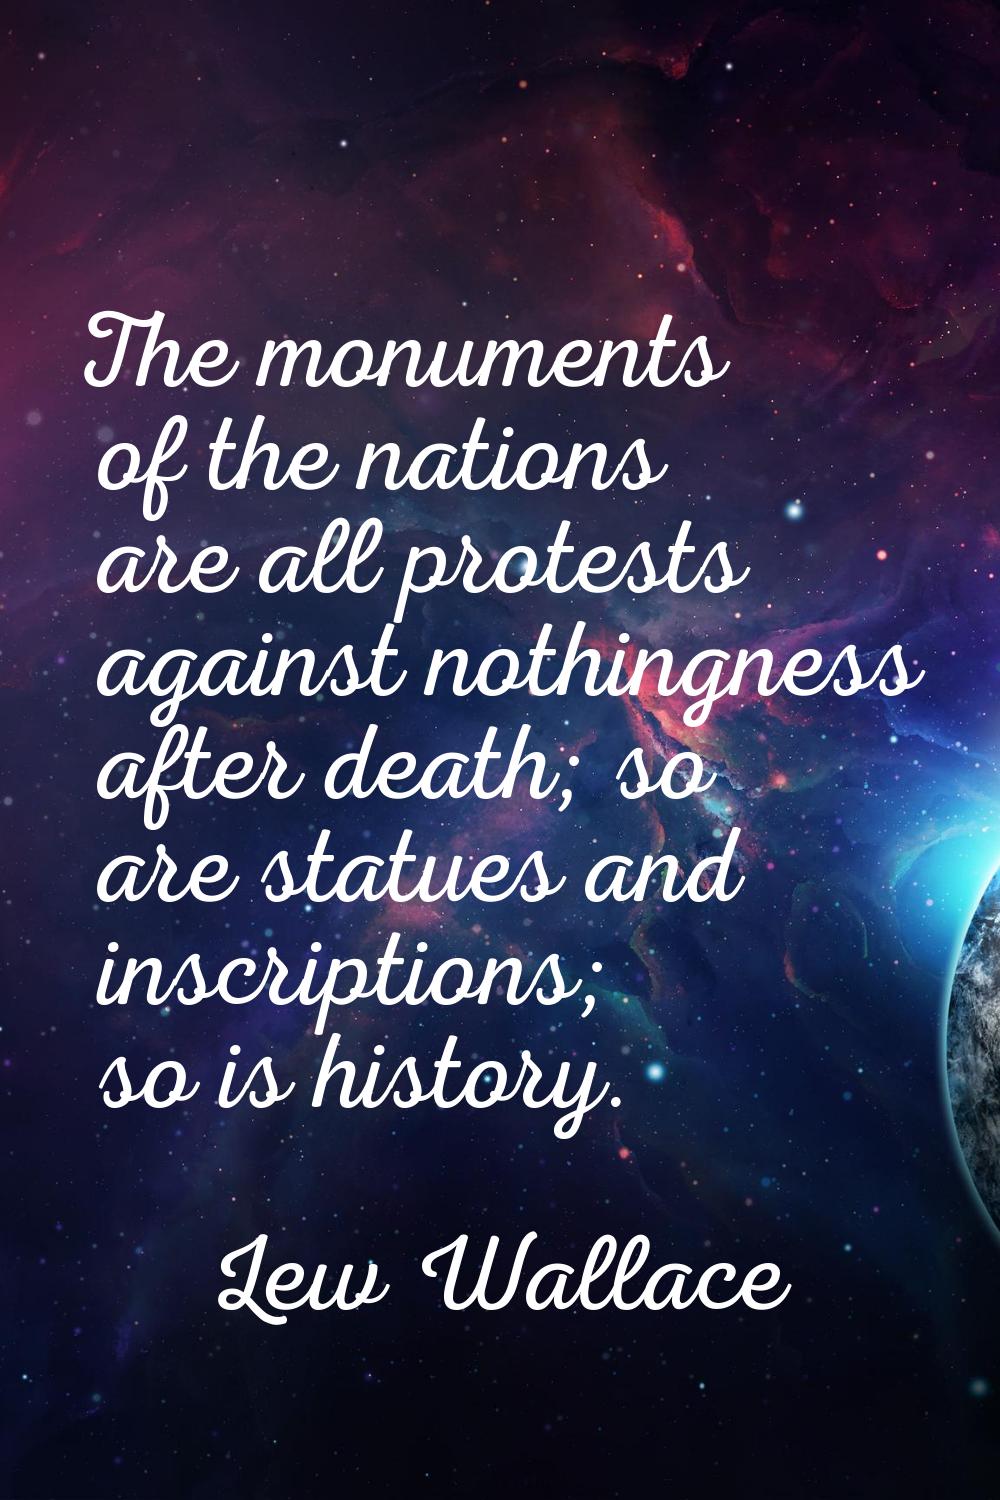 The monuments of the nations are all protests against nothingness after death; so are statues and i